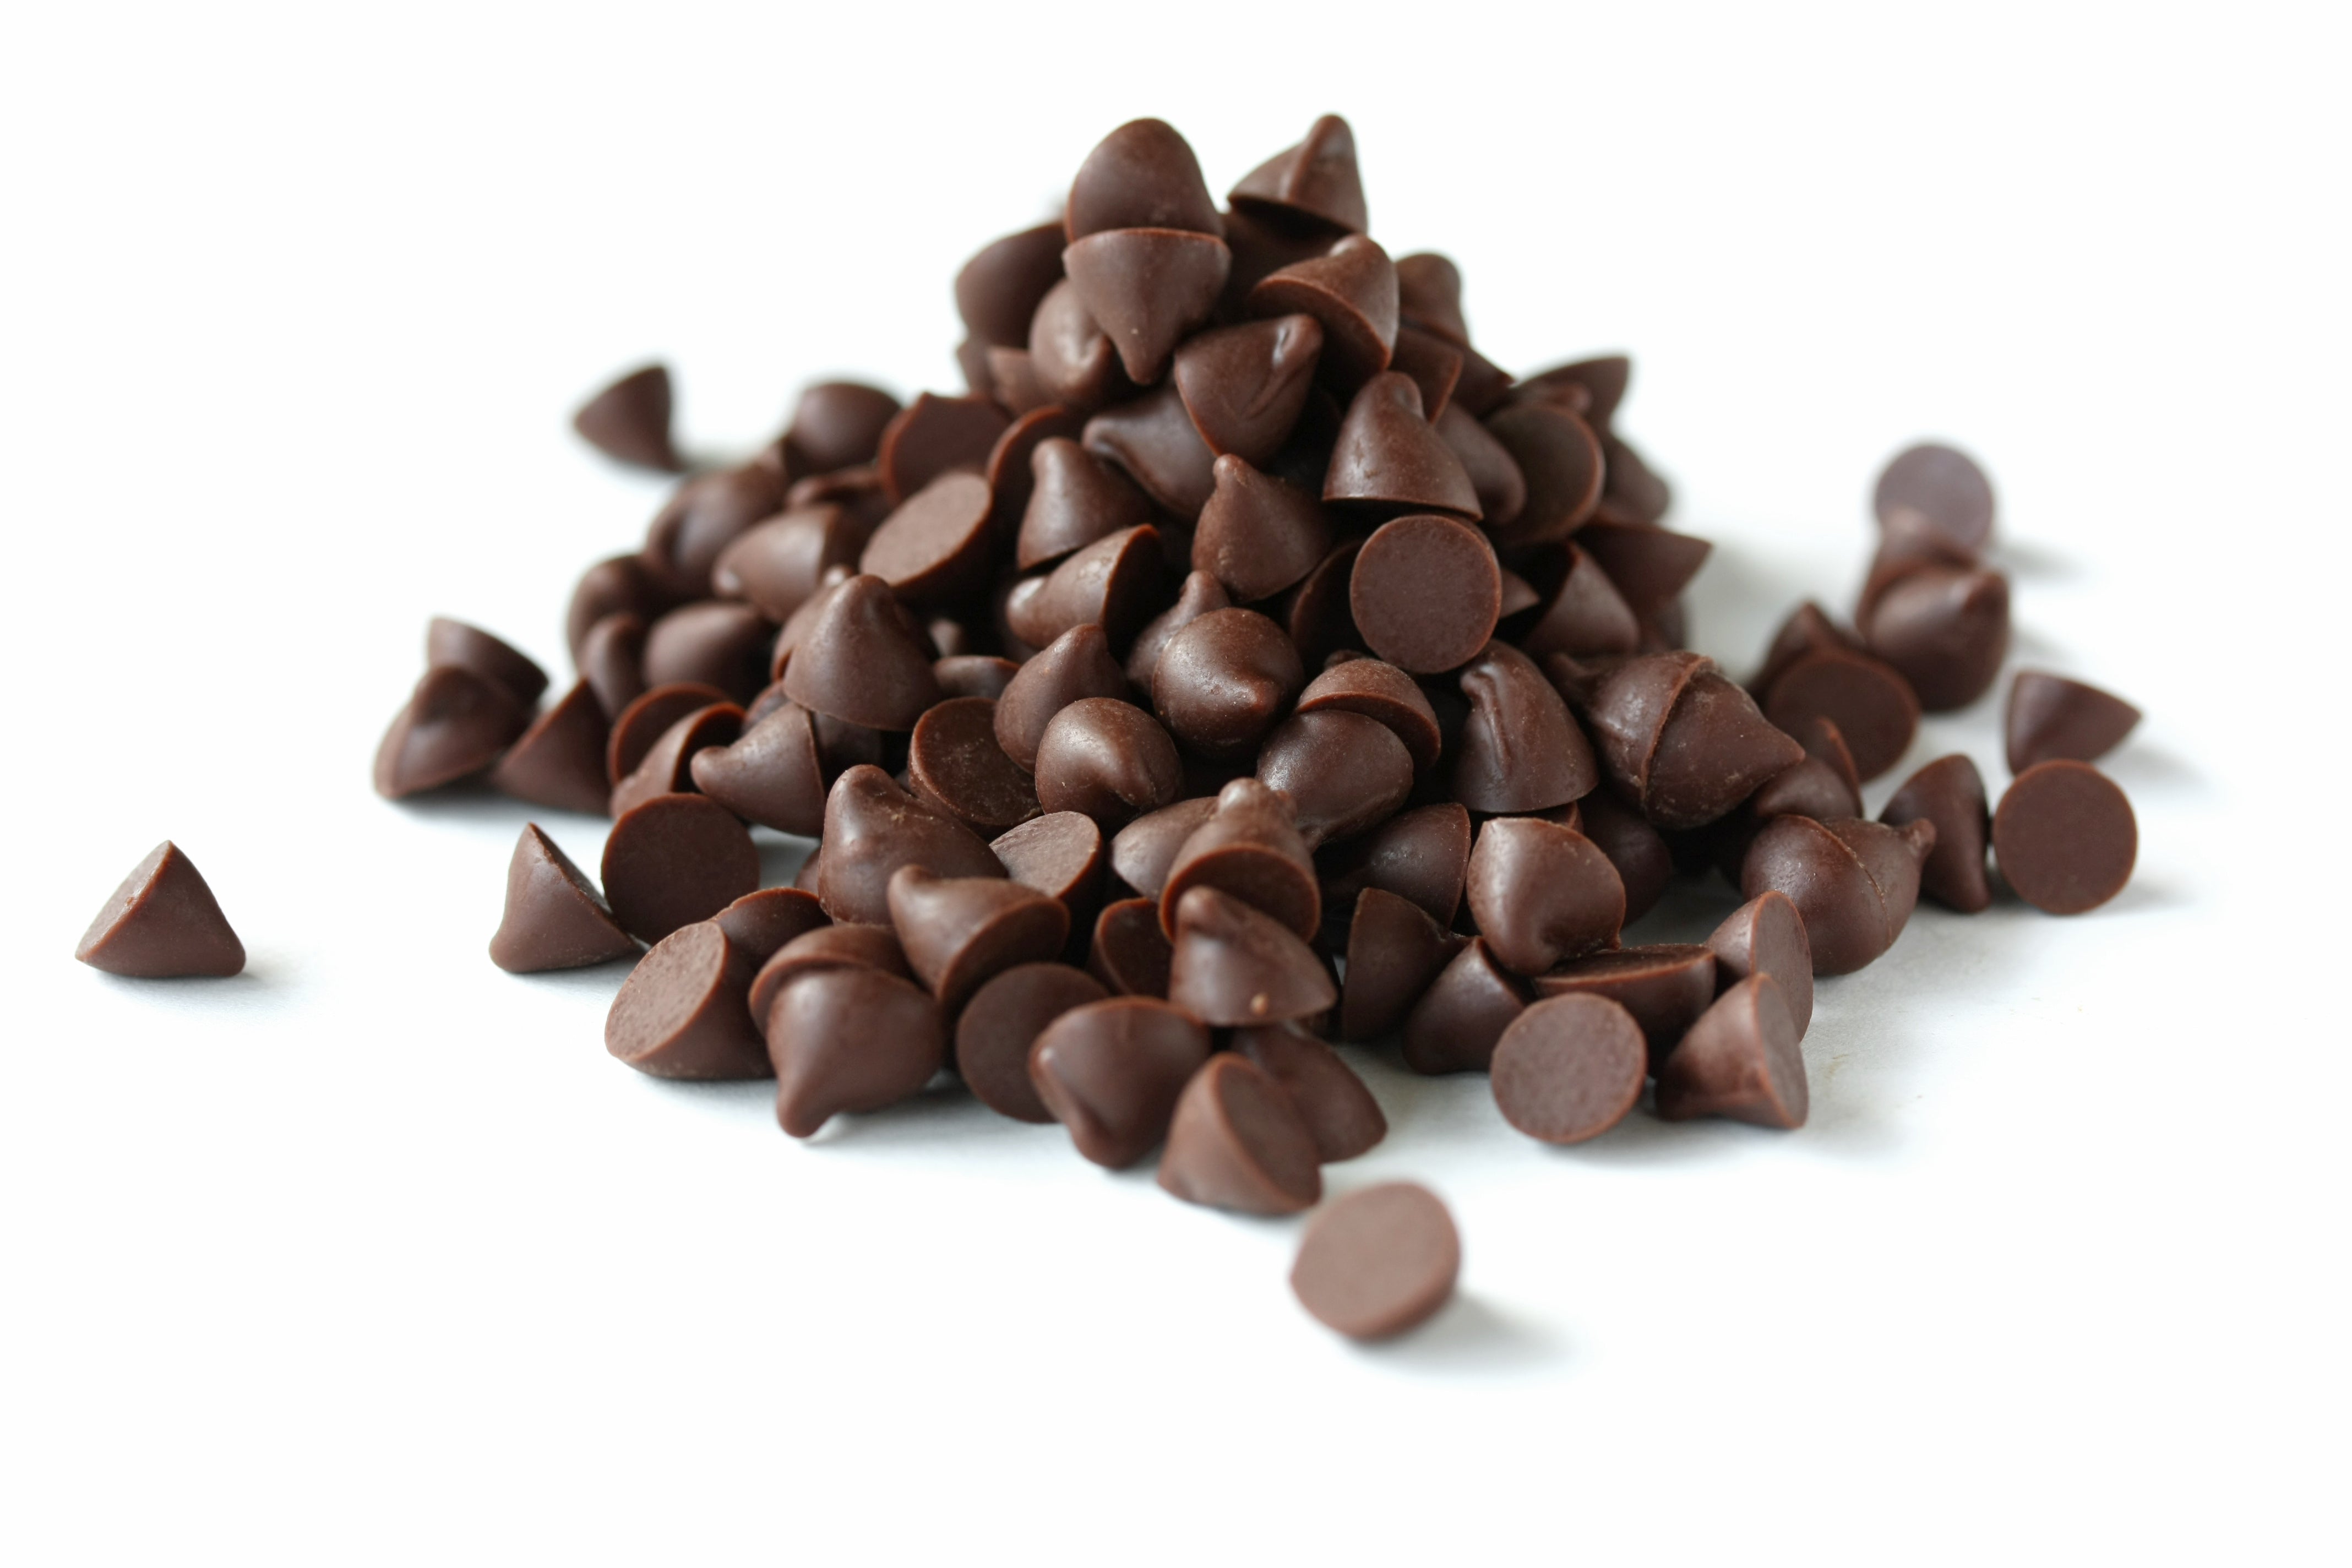 Semisweet Confectionery Chocolate Drops (11 lb) - 5 kg - Buy 1 Get 1 at 50% OFF